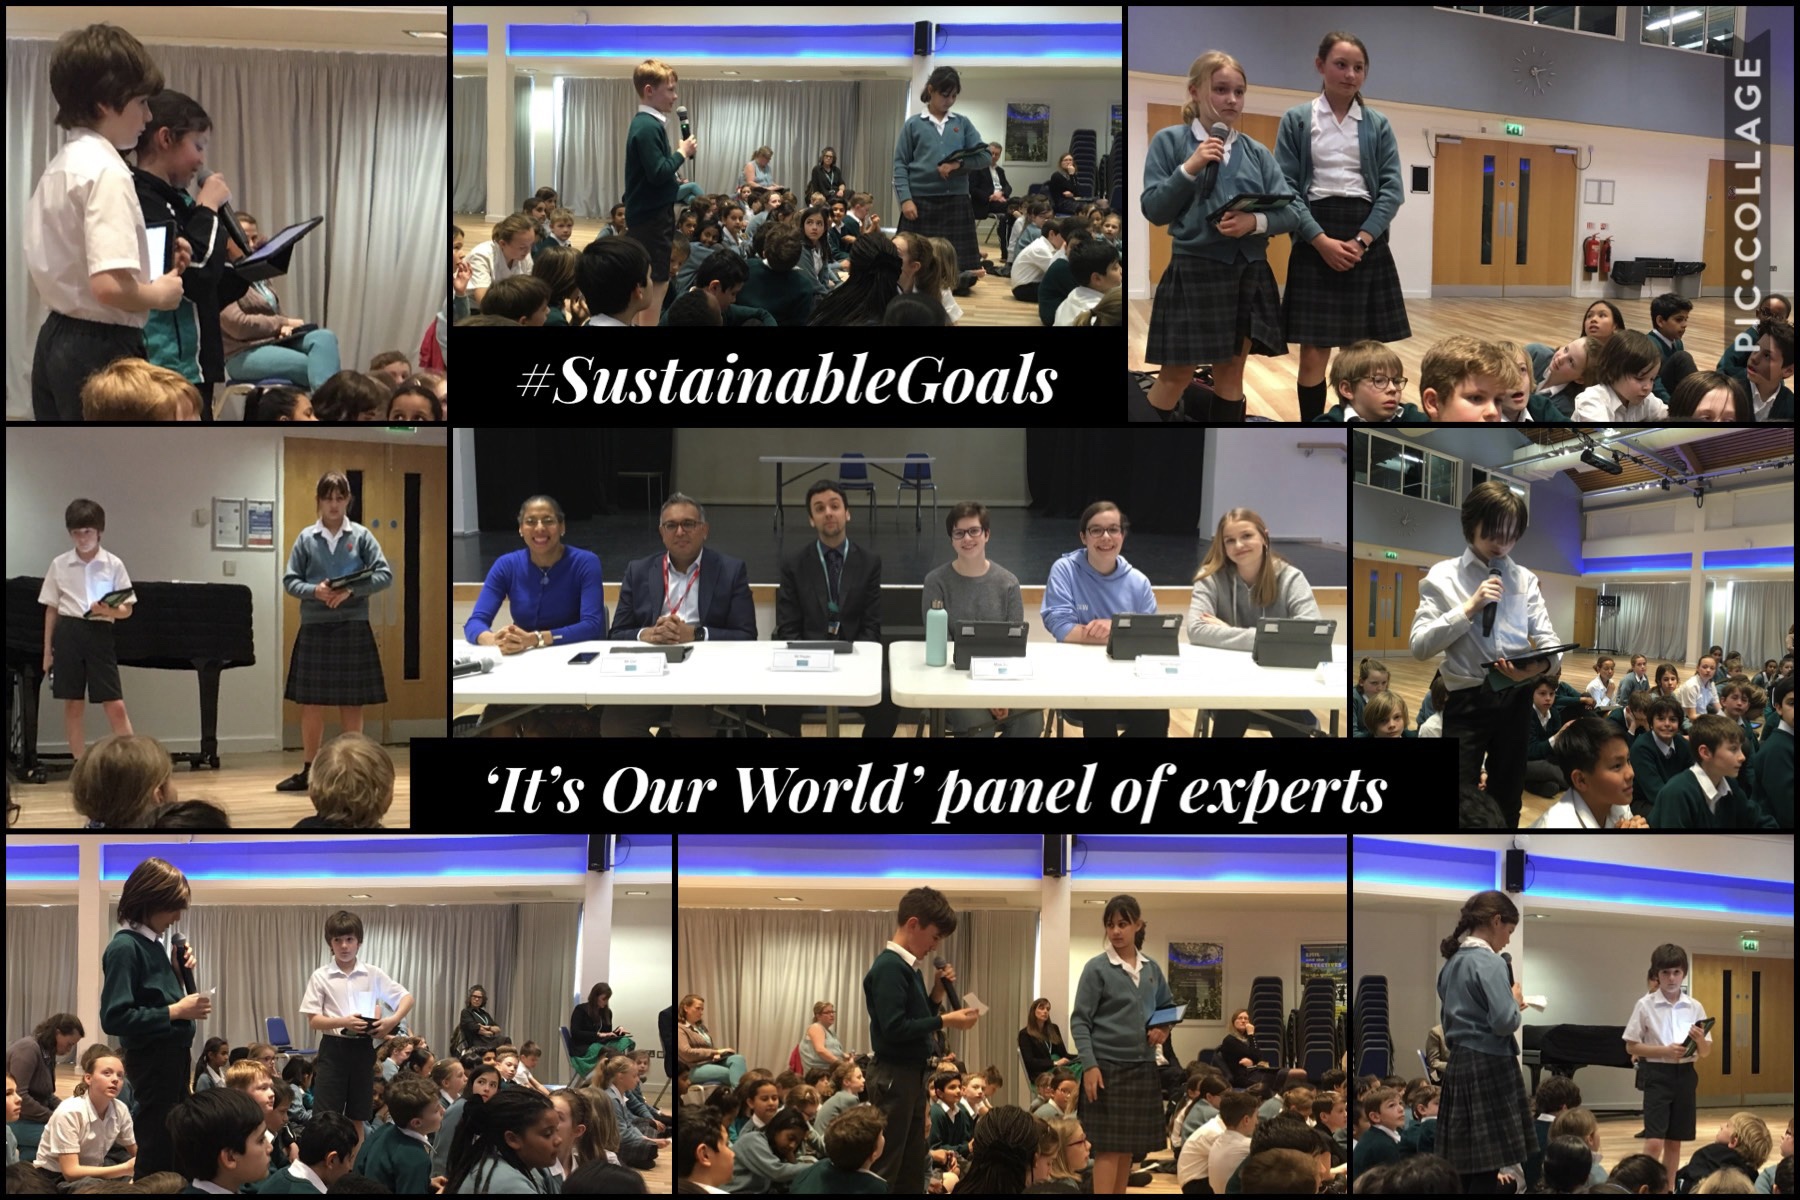 It's our world panel of experts